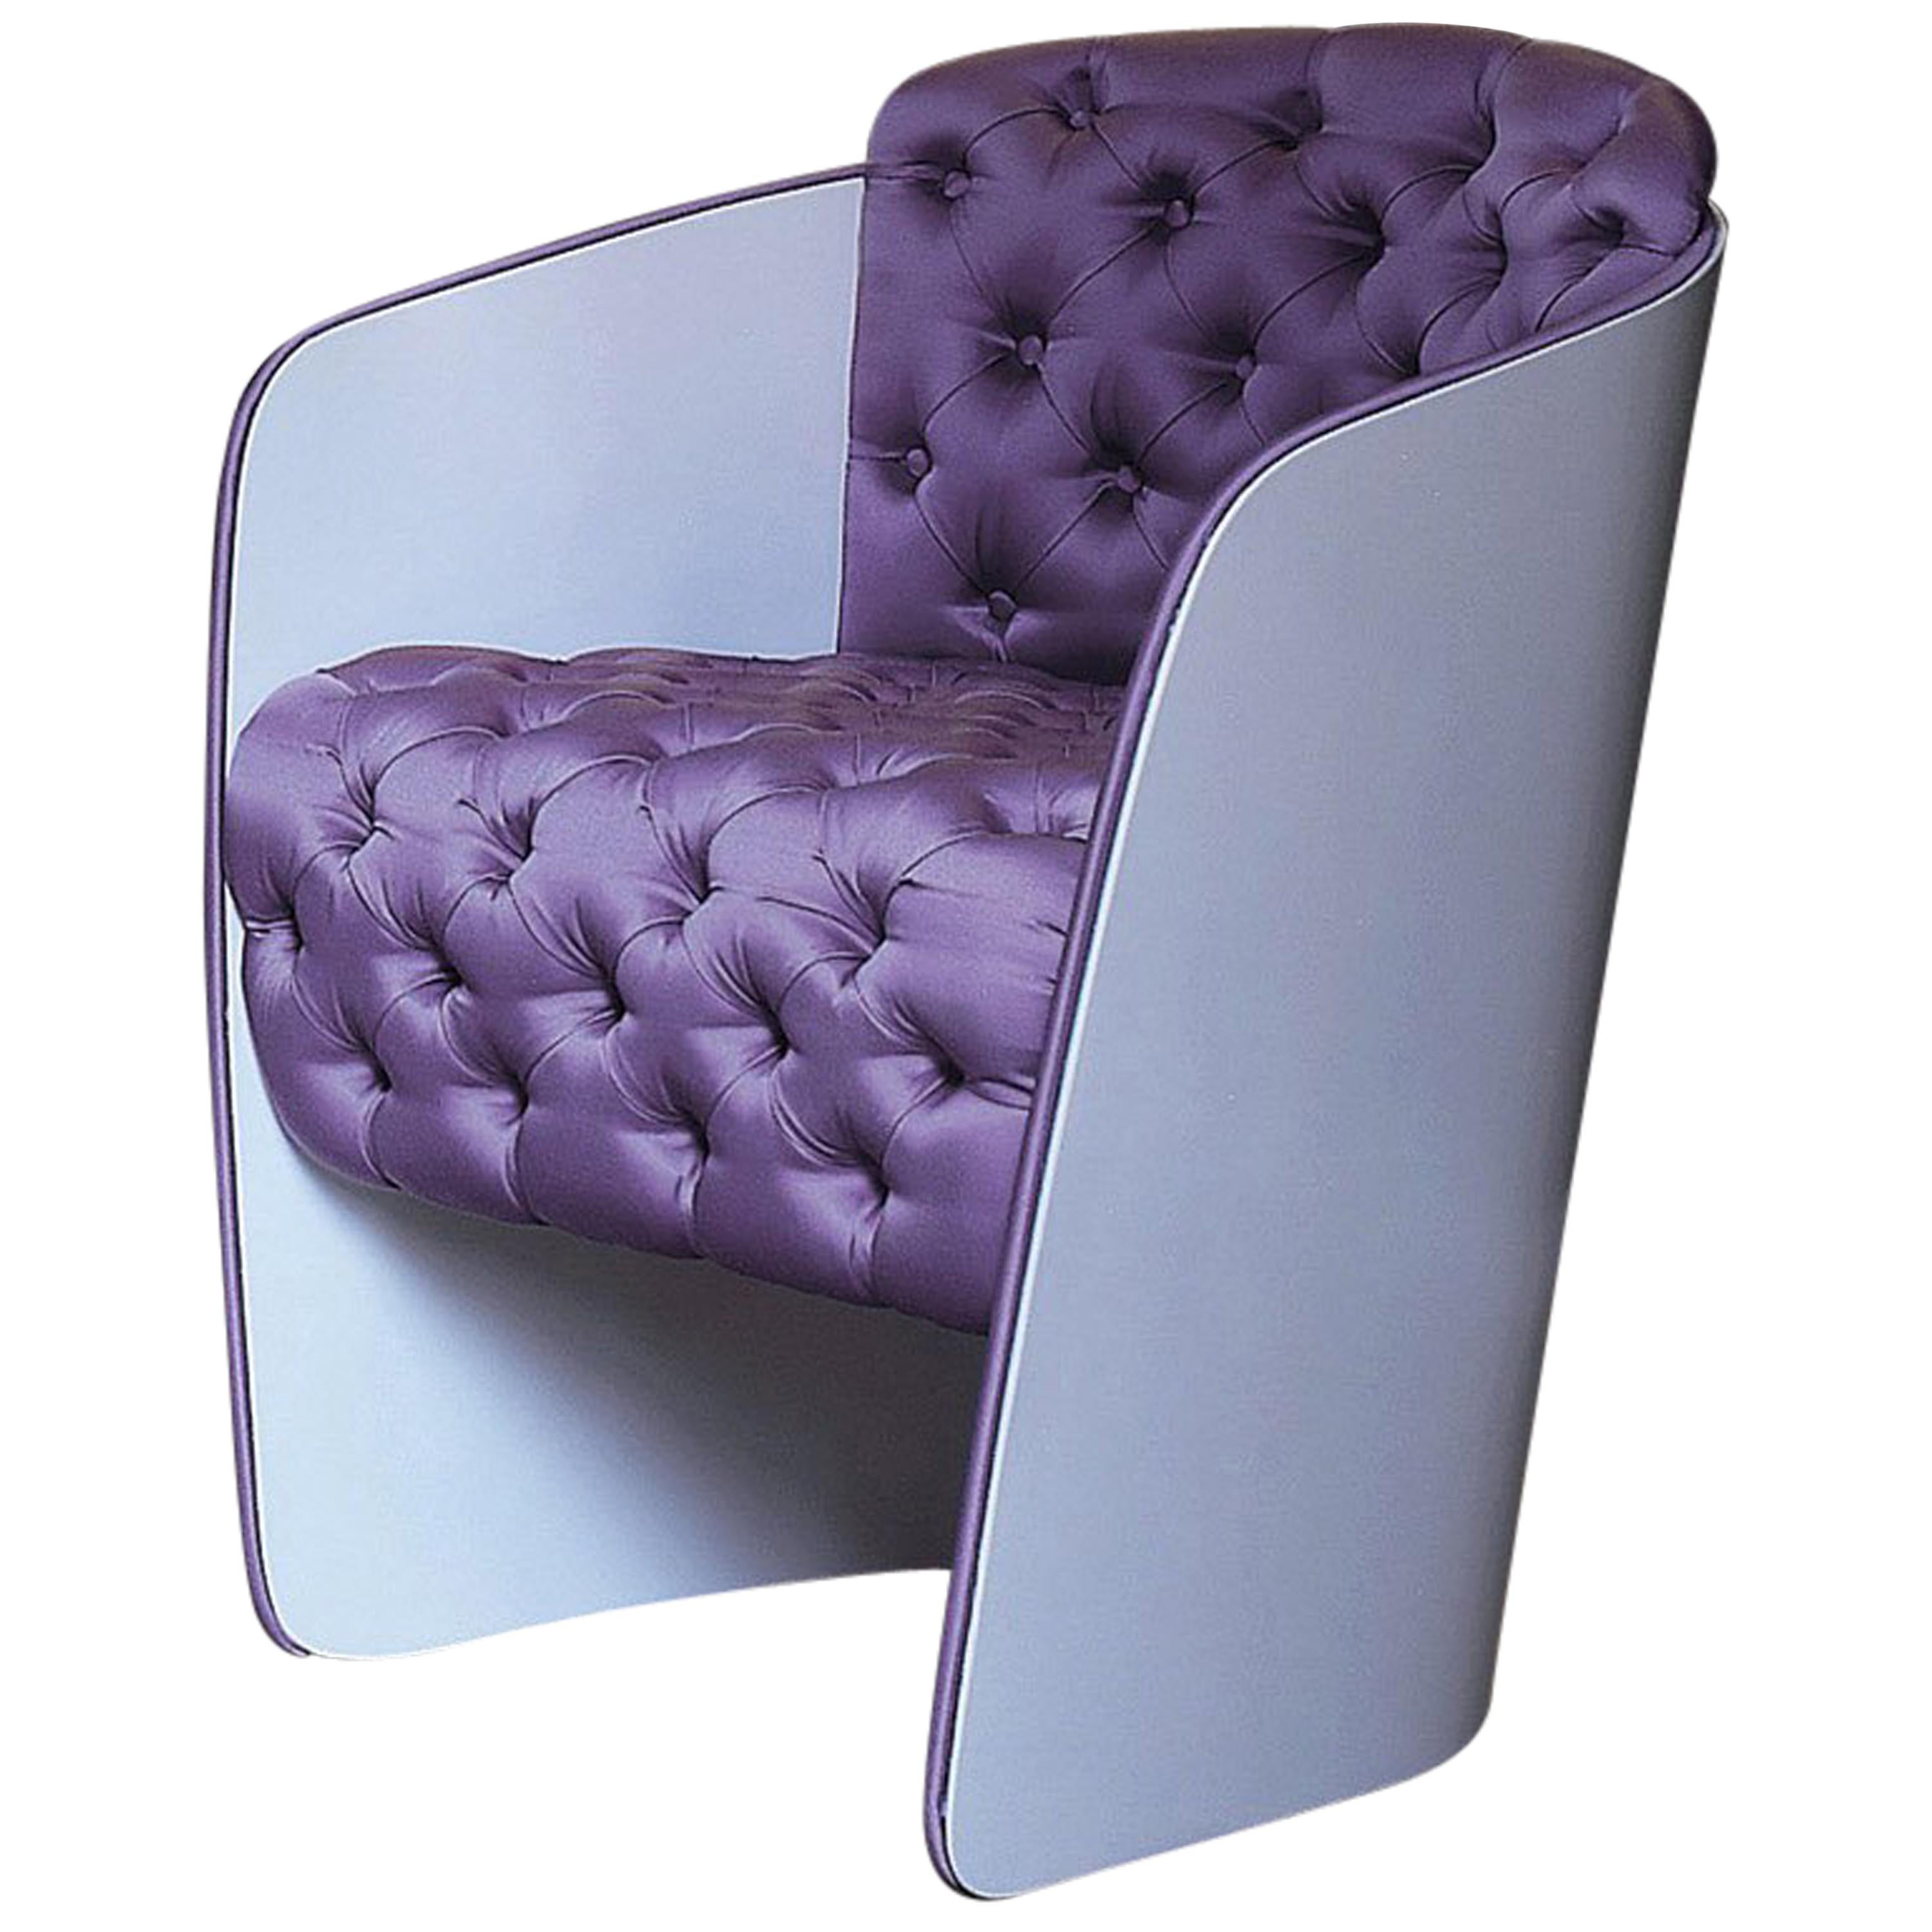 Nube Italia Sir Armchair in Lavender with White Back by Carlo Colombo